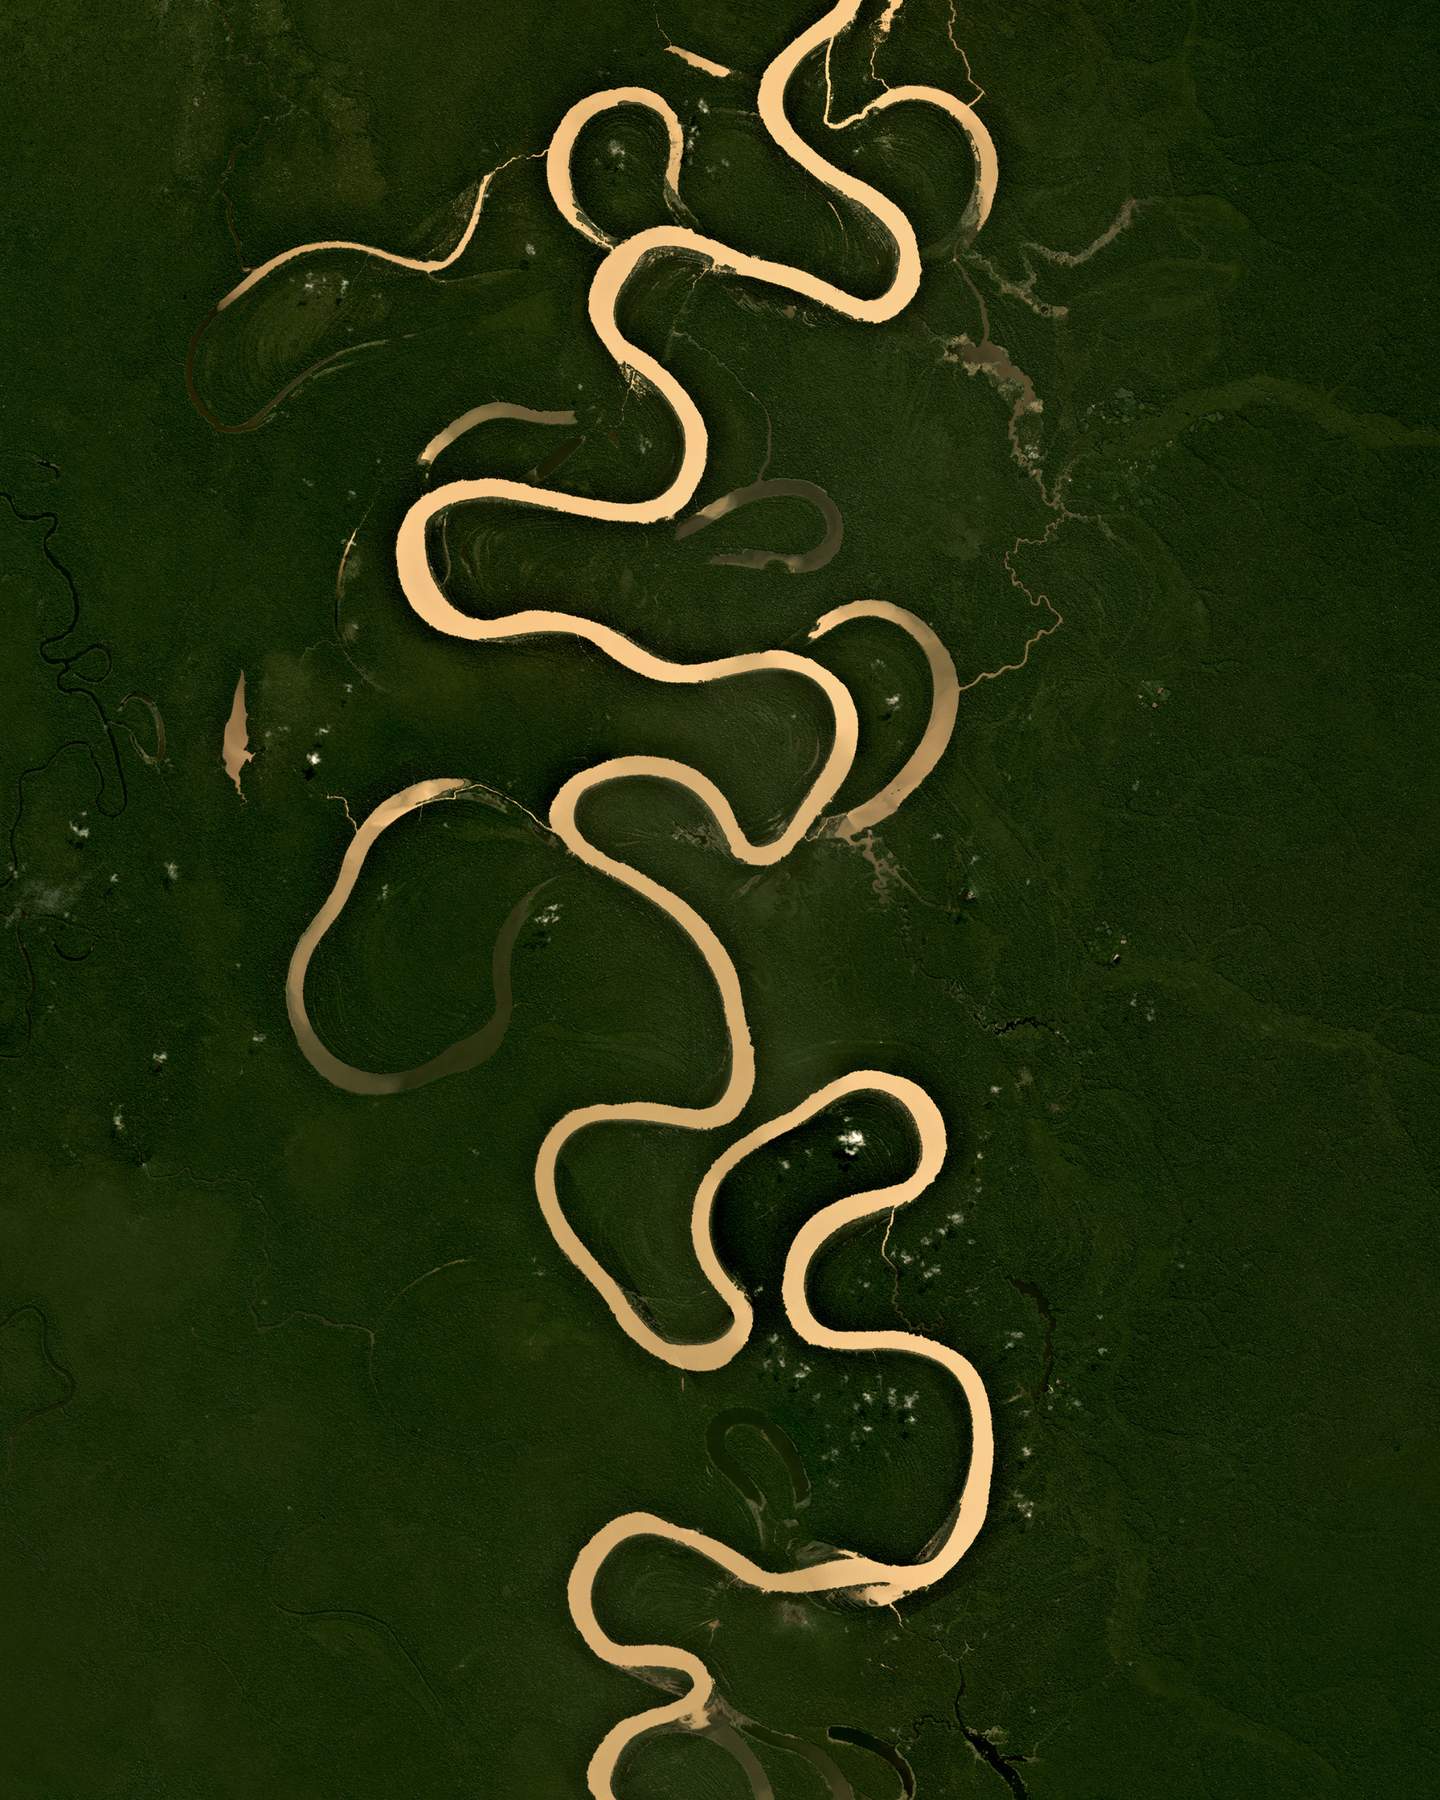 “The Juruá River is a southern tributary of the Amazon River, flowing approximately 1,500 miles (2,400 km) through Brazil and Perú. For most of its length, the river winds through the Amazon basin and is generally curvy and sluggish.”